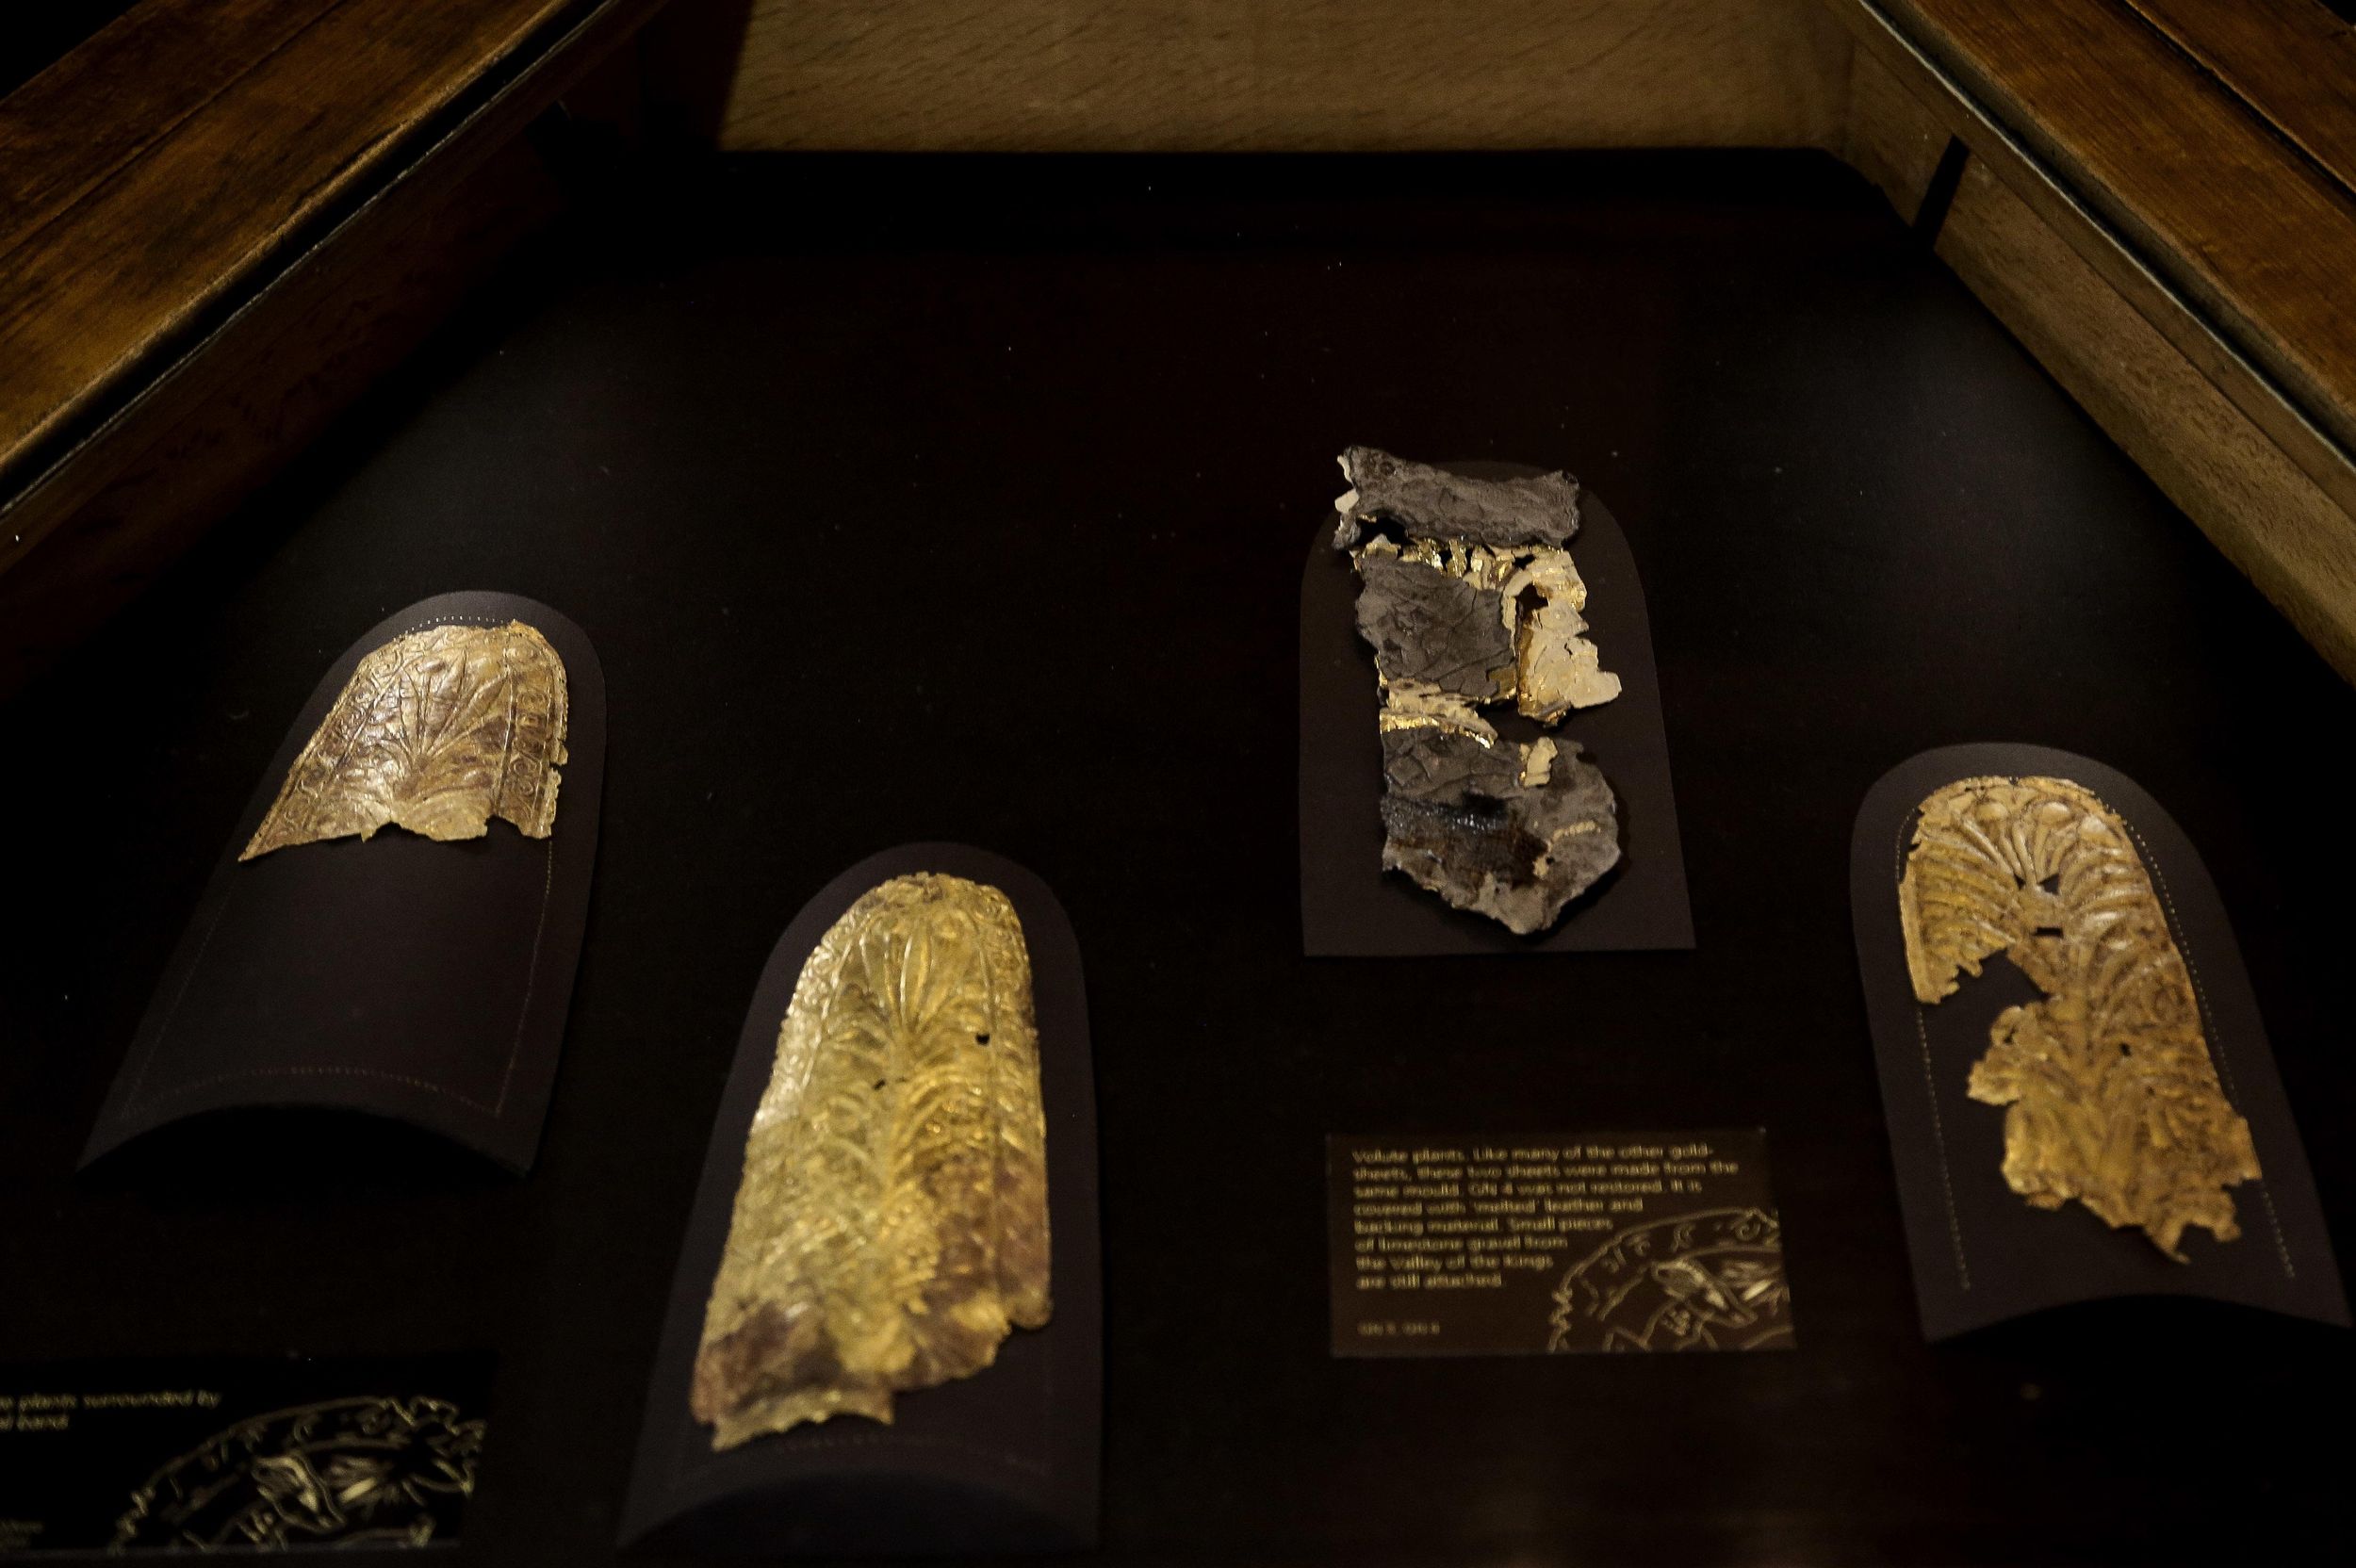 Egypt Displays Previously Unseen King Tut Artifacts The Spokesman Review